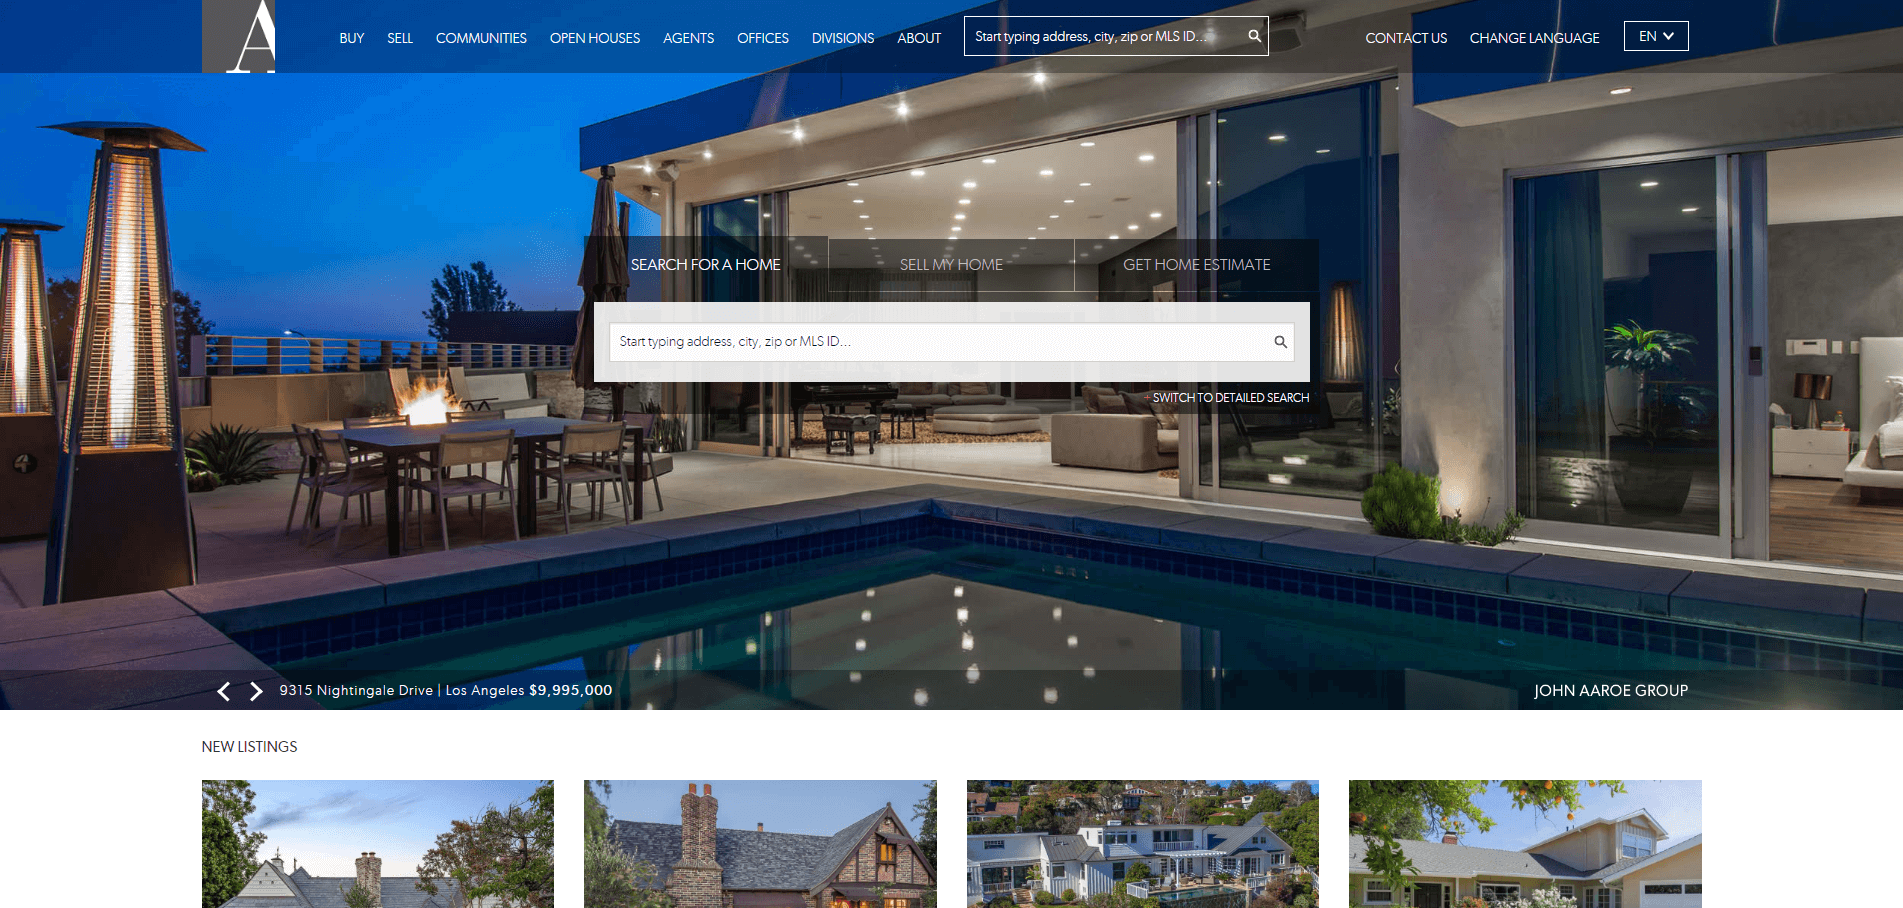  Whoa!  We made a list of the 101 best real estate websites.  We ranked each site 1-101 and reviewed them all.  Here's aaroe.com.  Curious who made the list? 